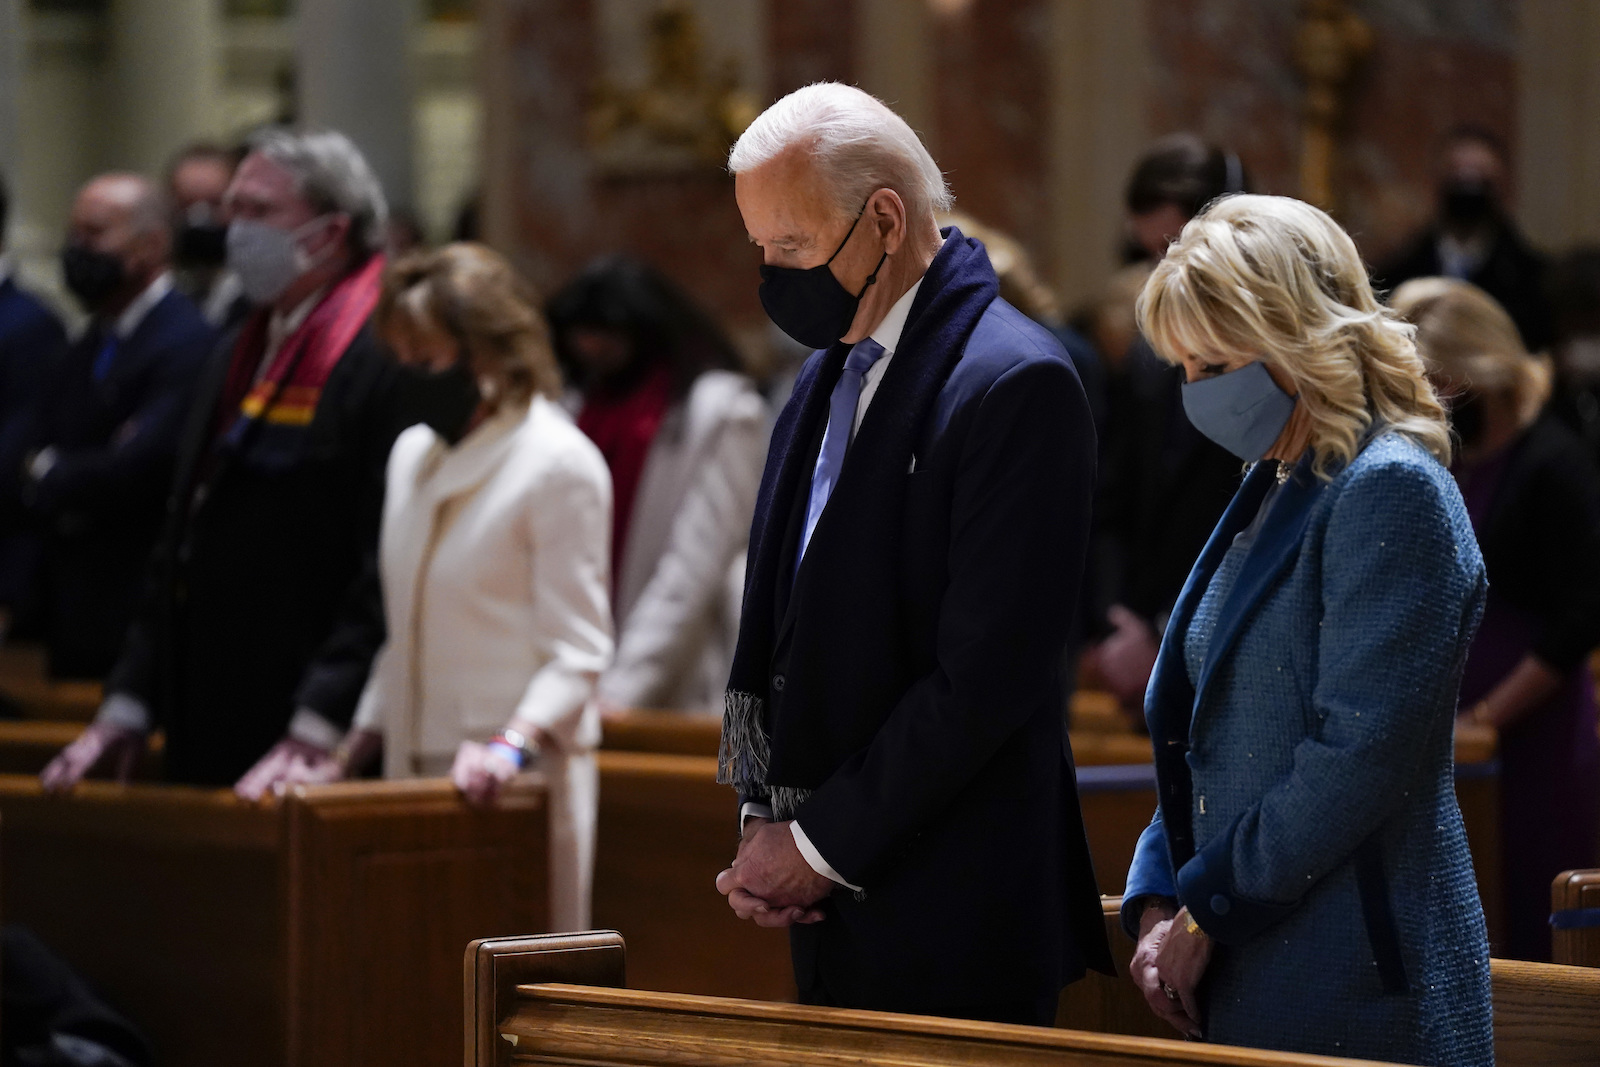 In this Jan. 20, 2021, file photo, President-elect Joe Biden and his wife, Jill Biden, attend Mass at the Cathedral of St. Matthew the Apostle during Inauguration Day ceremonies in Washington. (AP Photo/Evan Vucci)